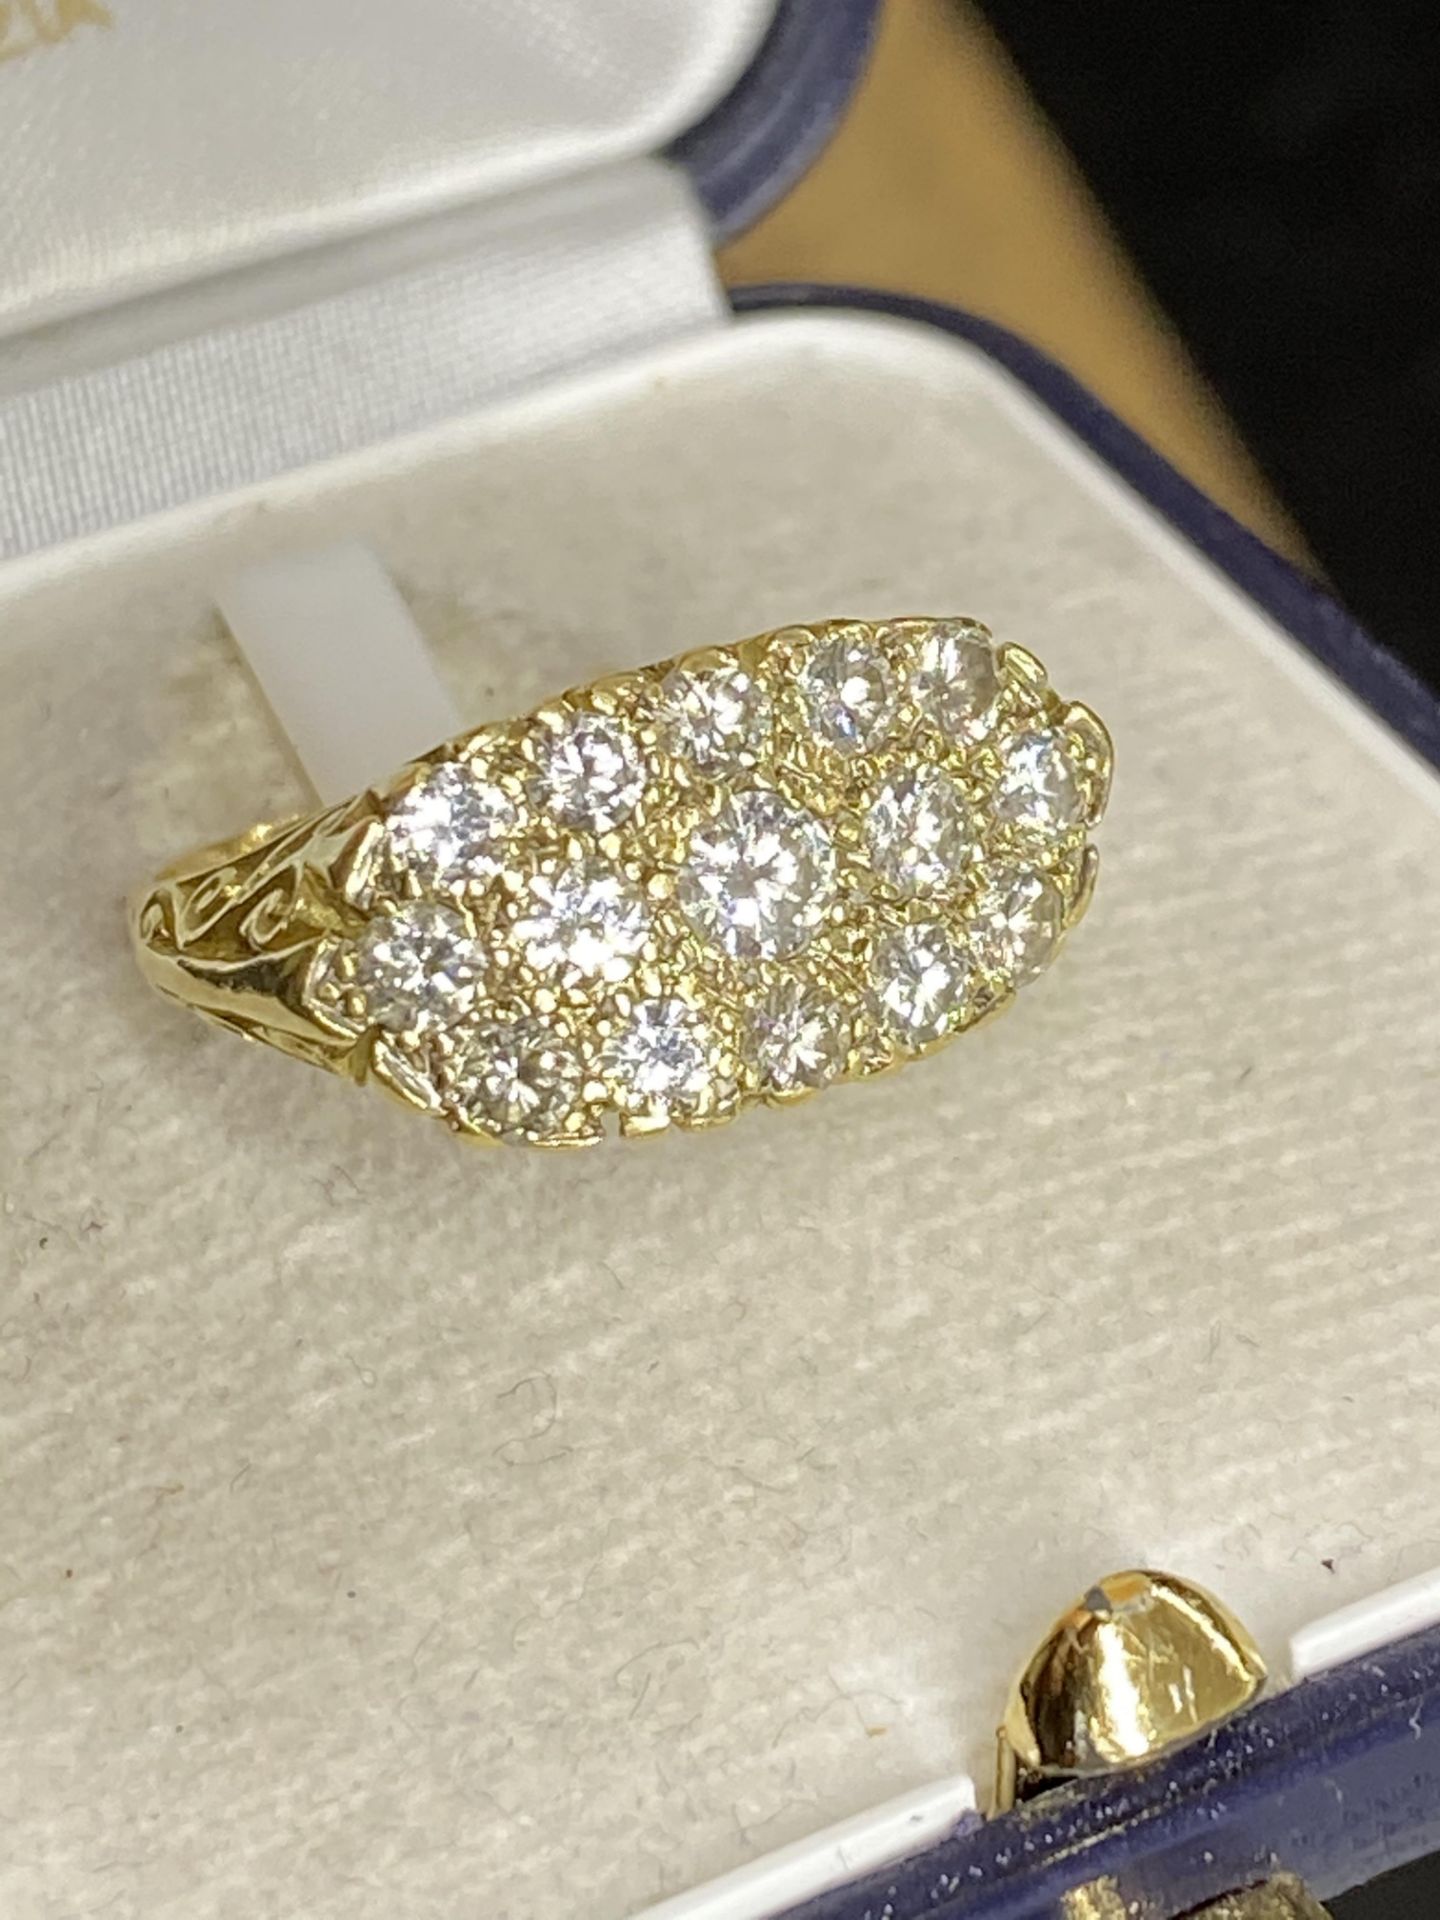 18ct YELLOW GOLD 3.27ct DIAMOND RING WITH 11K INSURANCE VALUATION - Image 5 of 10